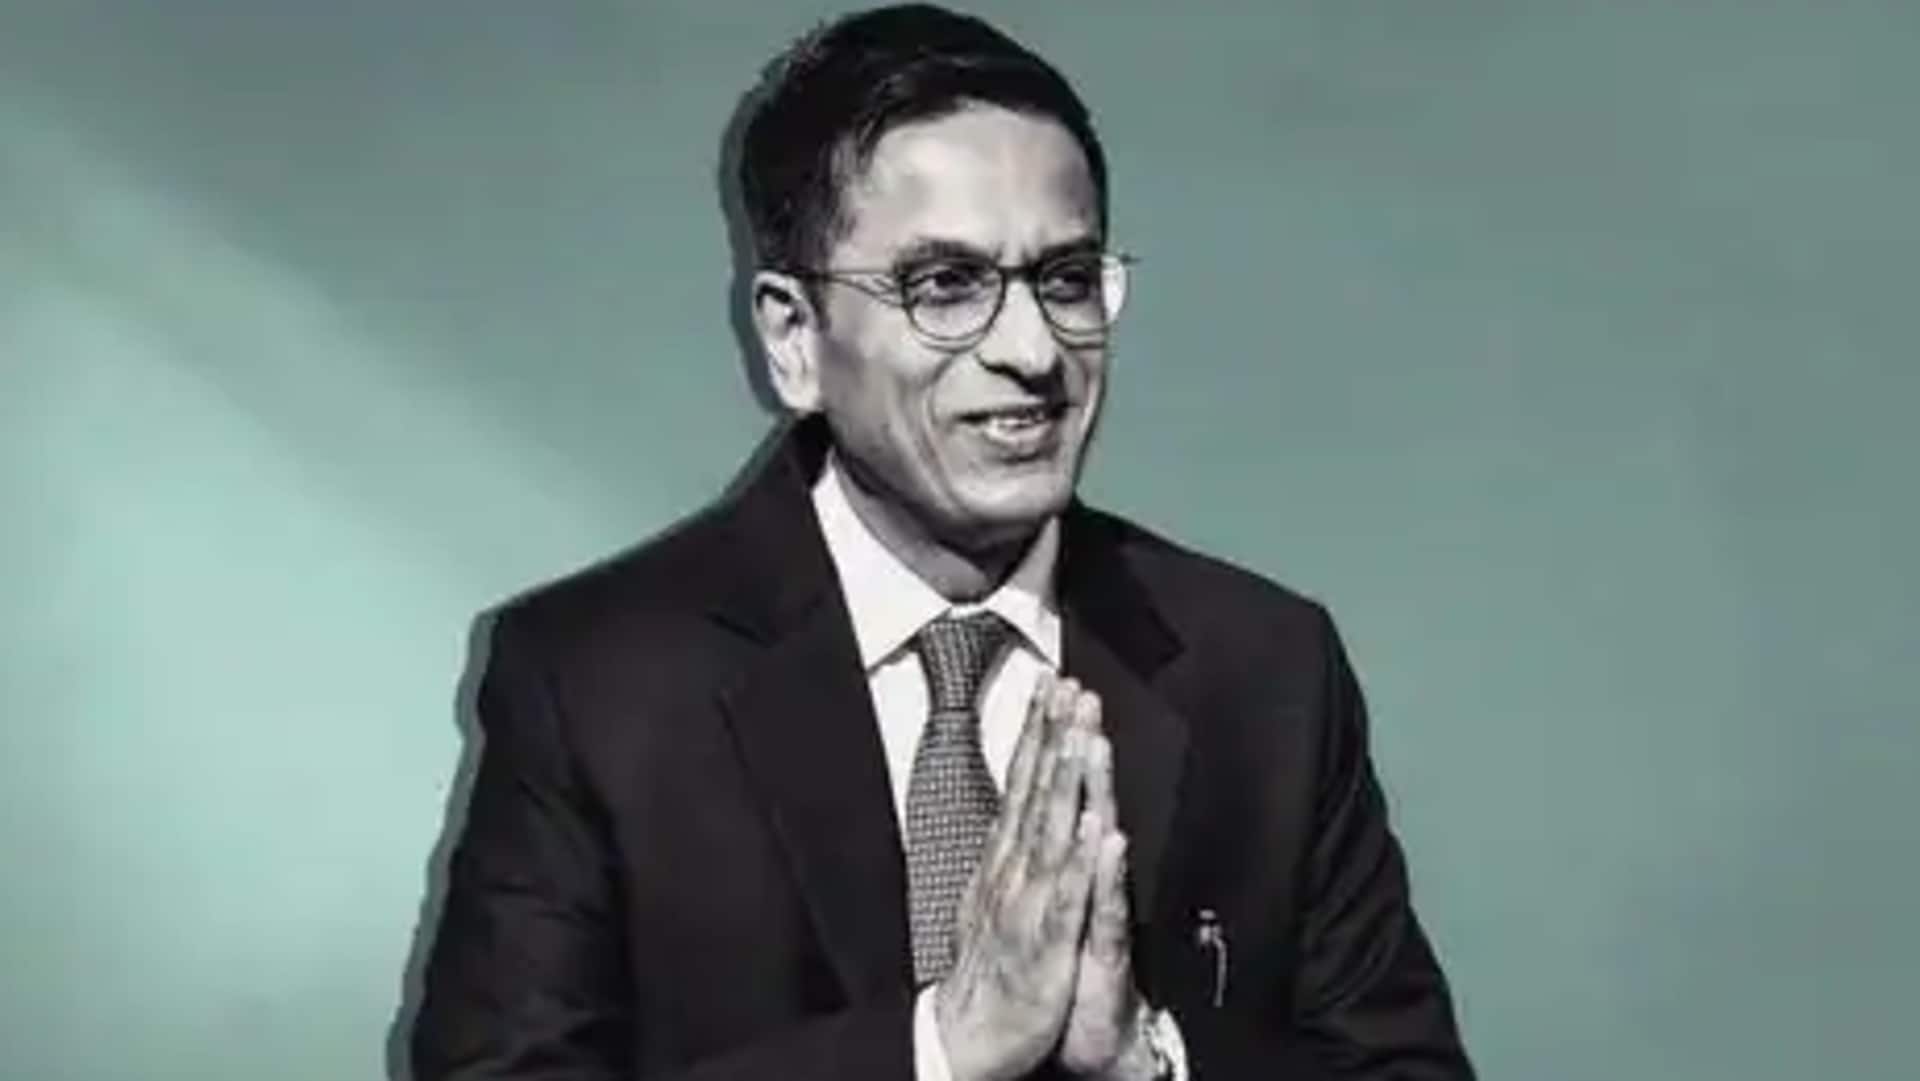 Law should not become an instrument of oppression: CJI Chandrachud